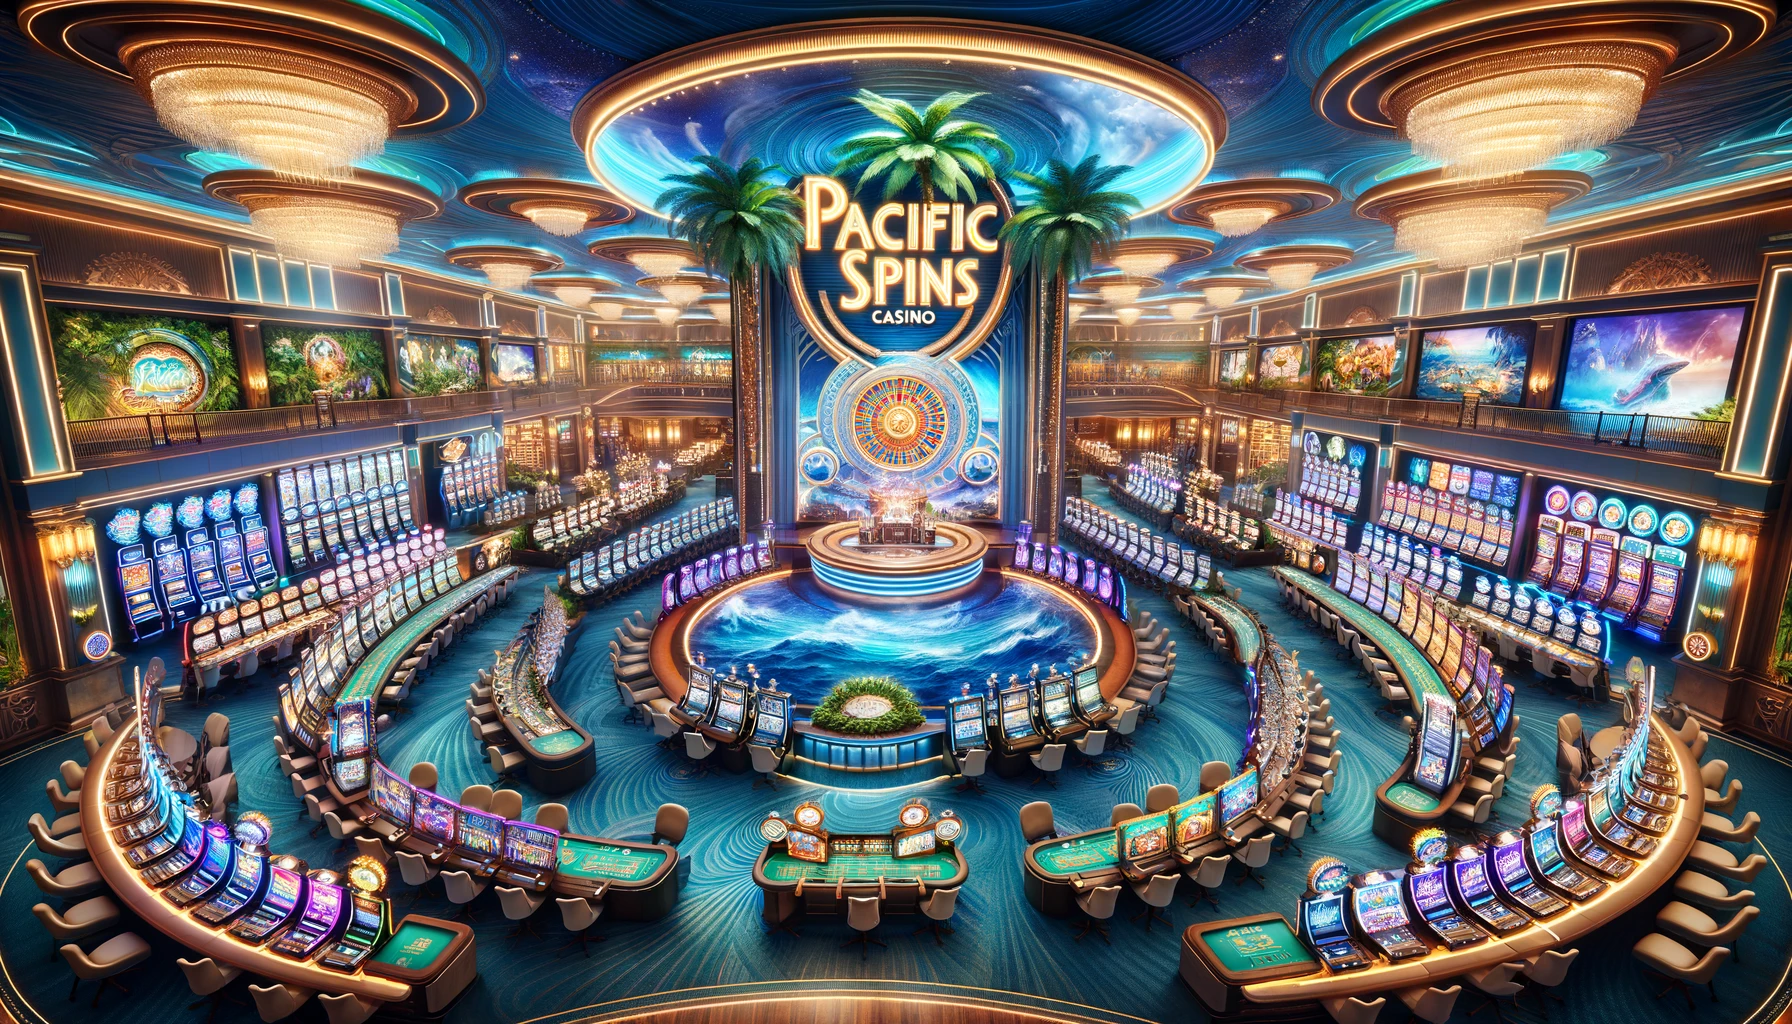 Dive into the #1 Ultimate Gaming Oasis: Pacific Spins Casino